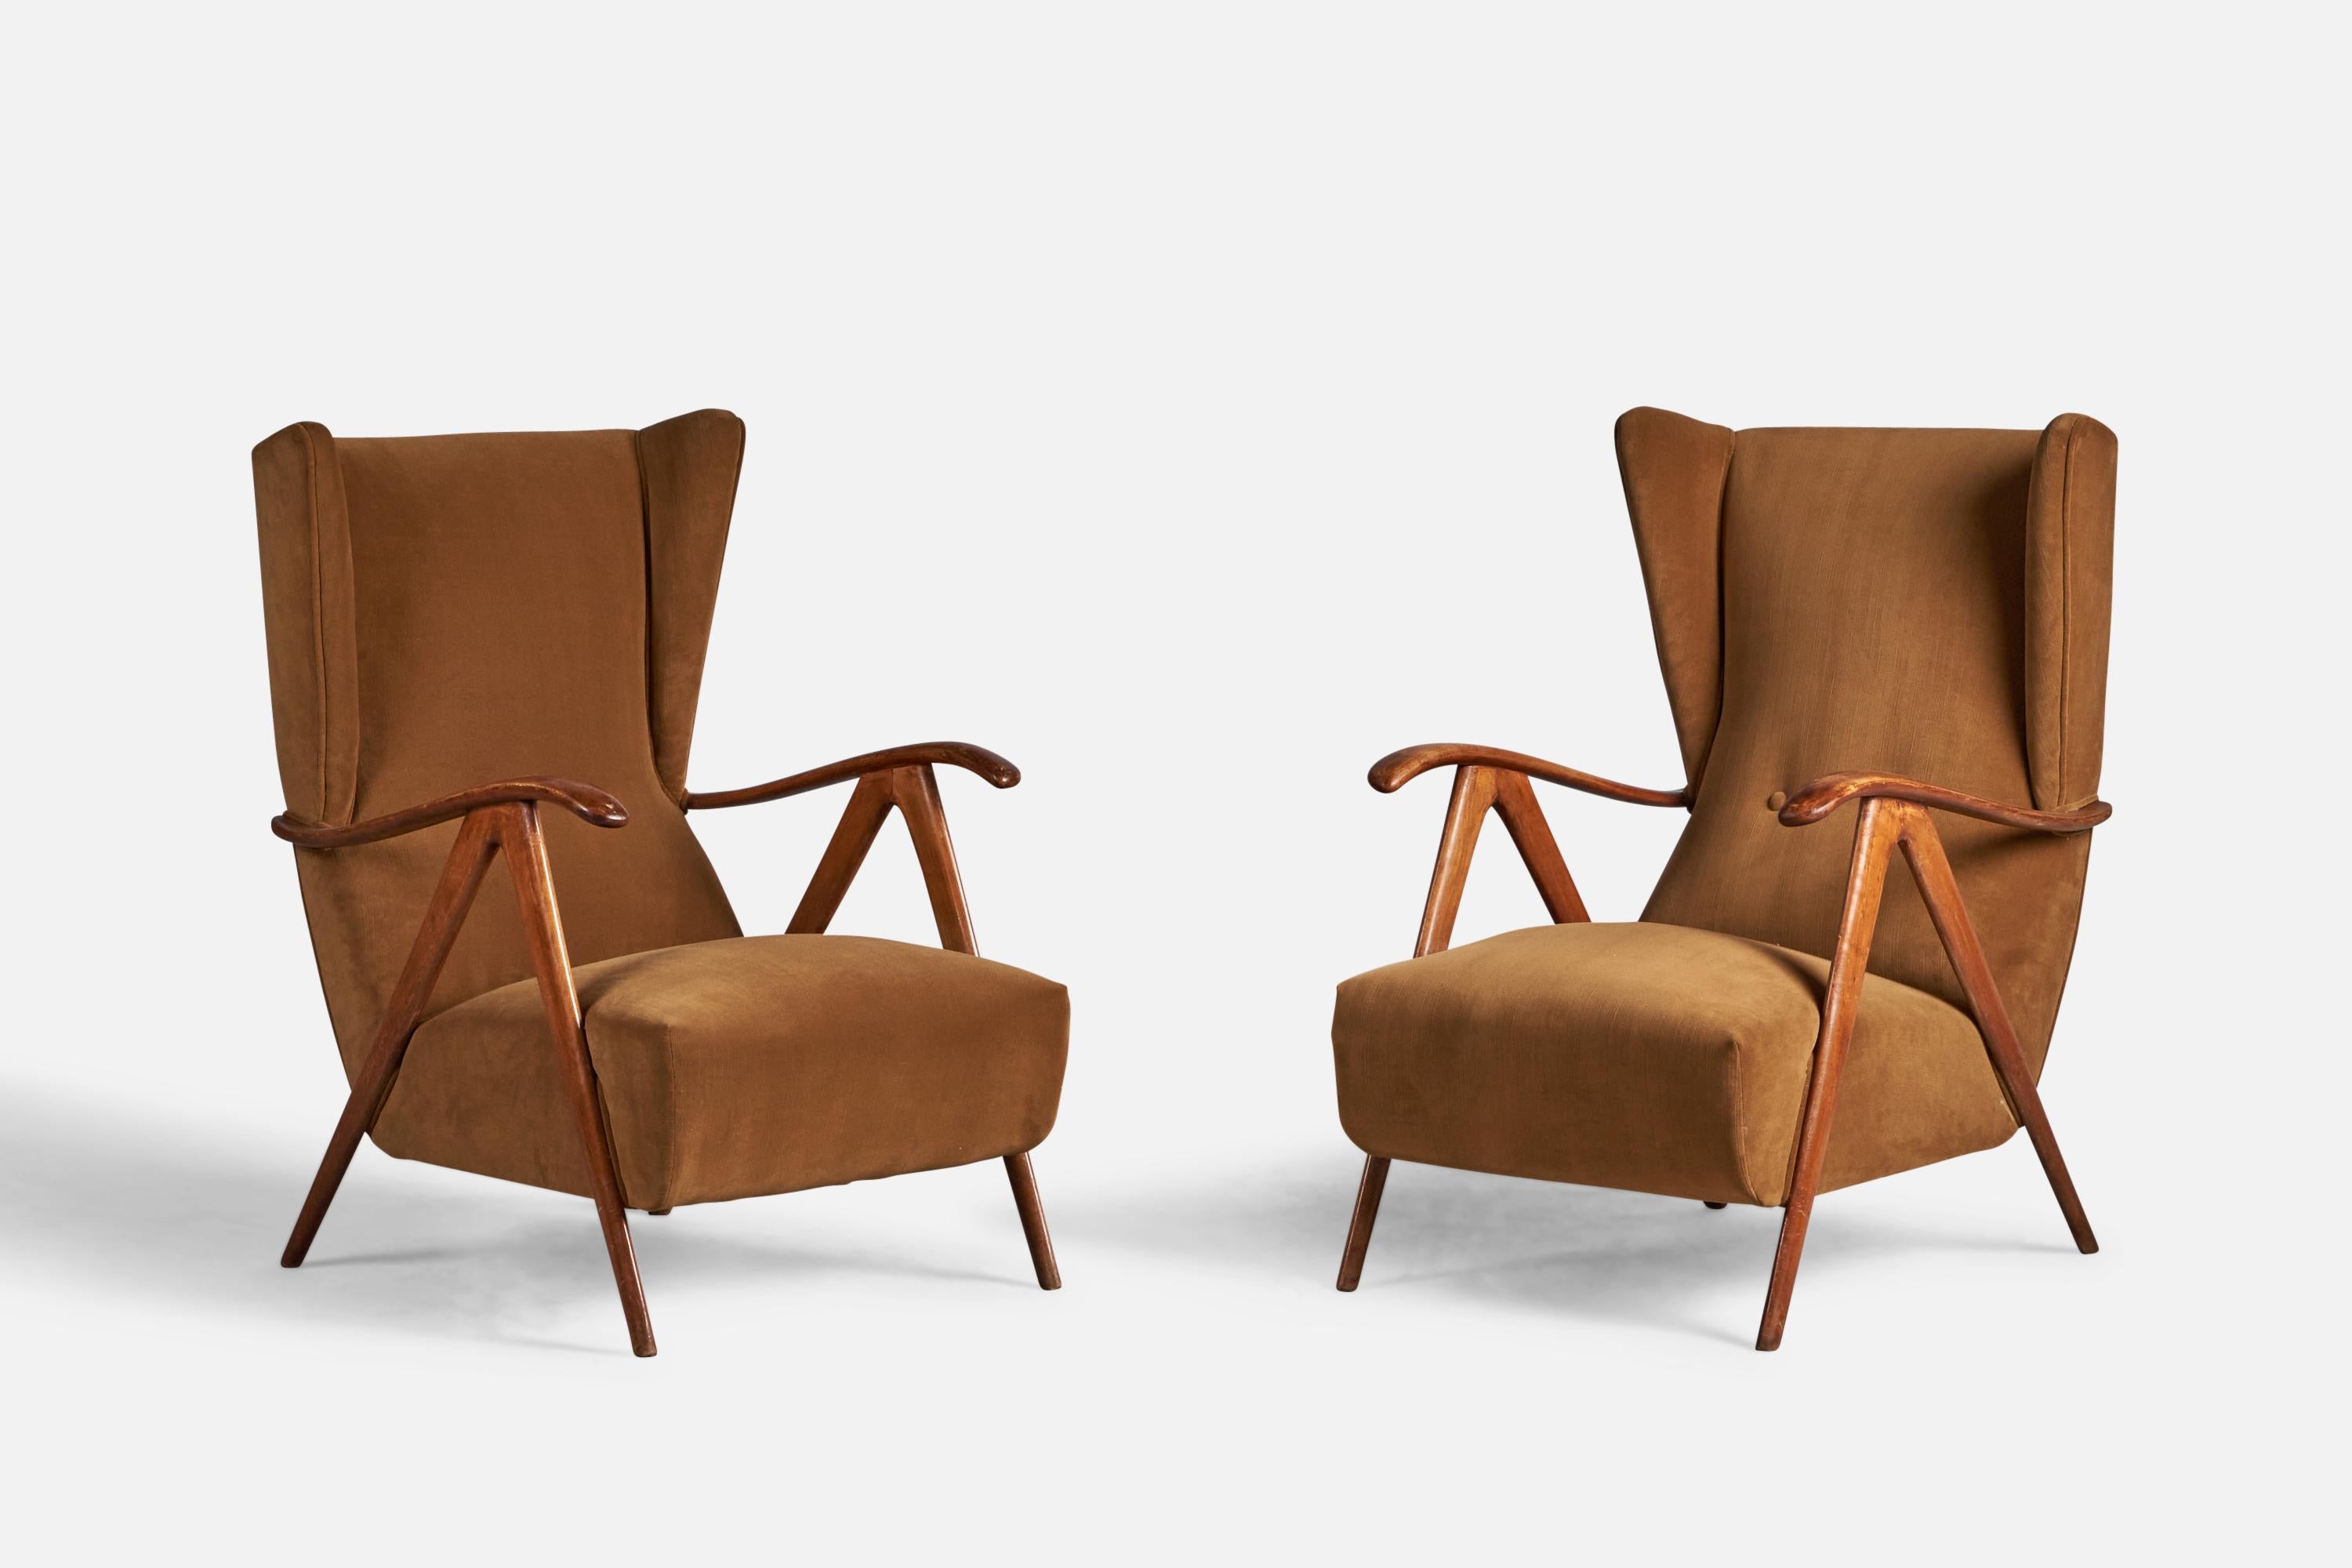 A pair of walnut and velvet lounge chairs, designed and produced in Italy, 1940s.

14